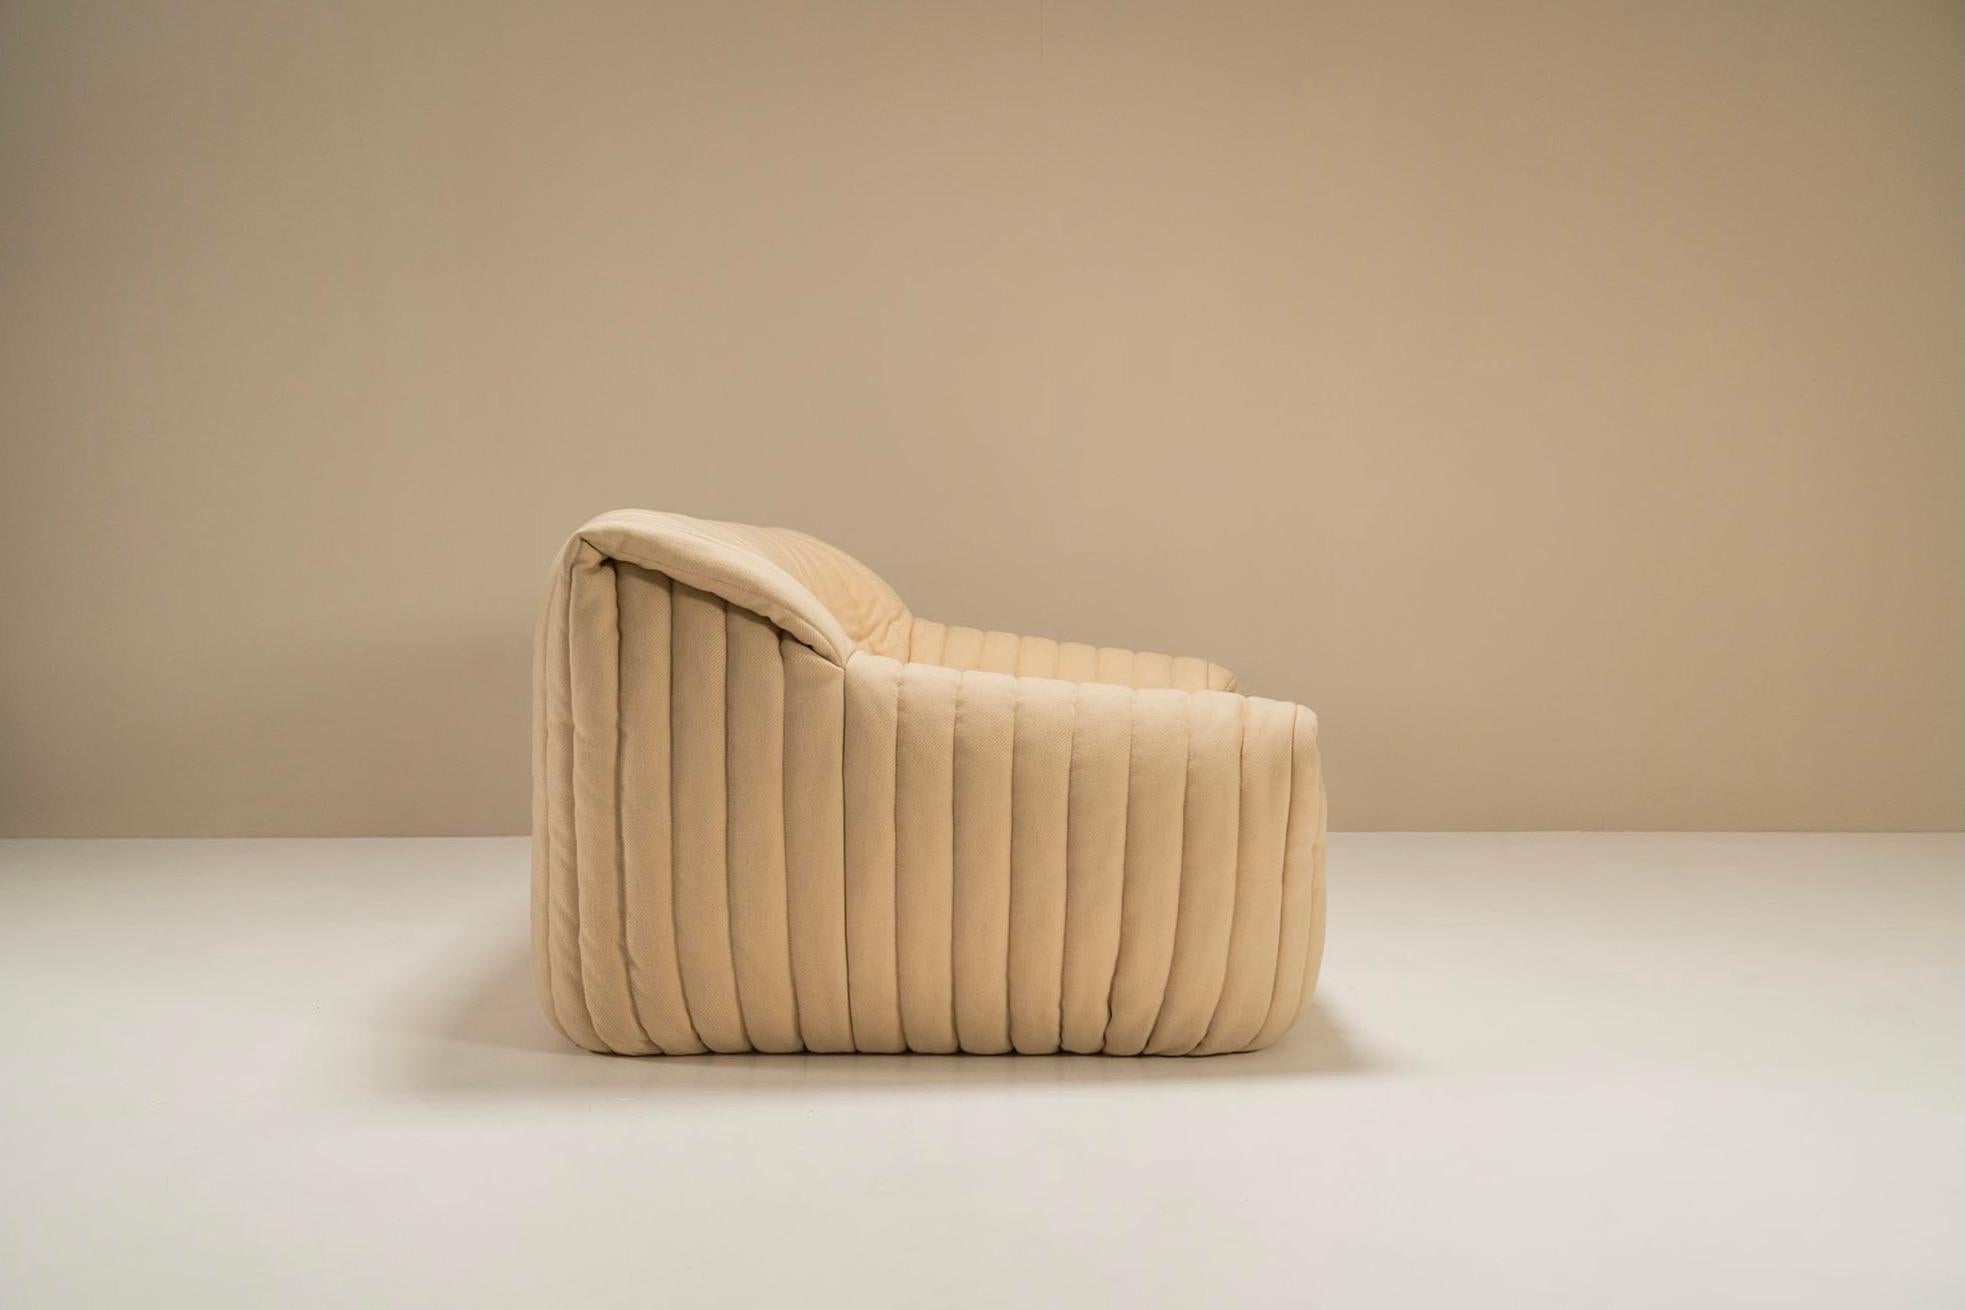 Mid-Century Modern Two-Seater Sofa, Model “Sandra”, by Annie Hieronimus for Cinna, France, 1976